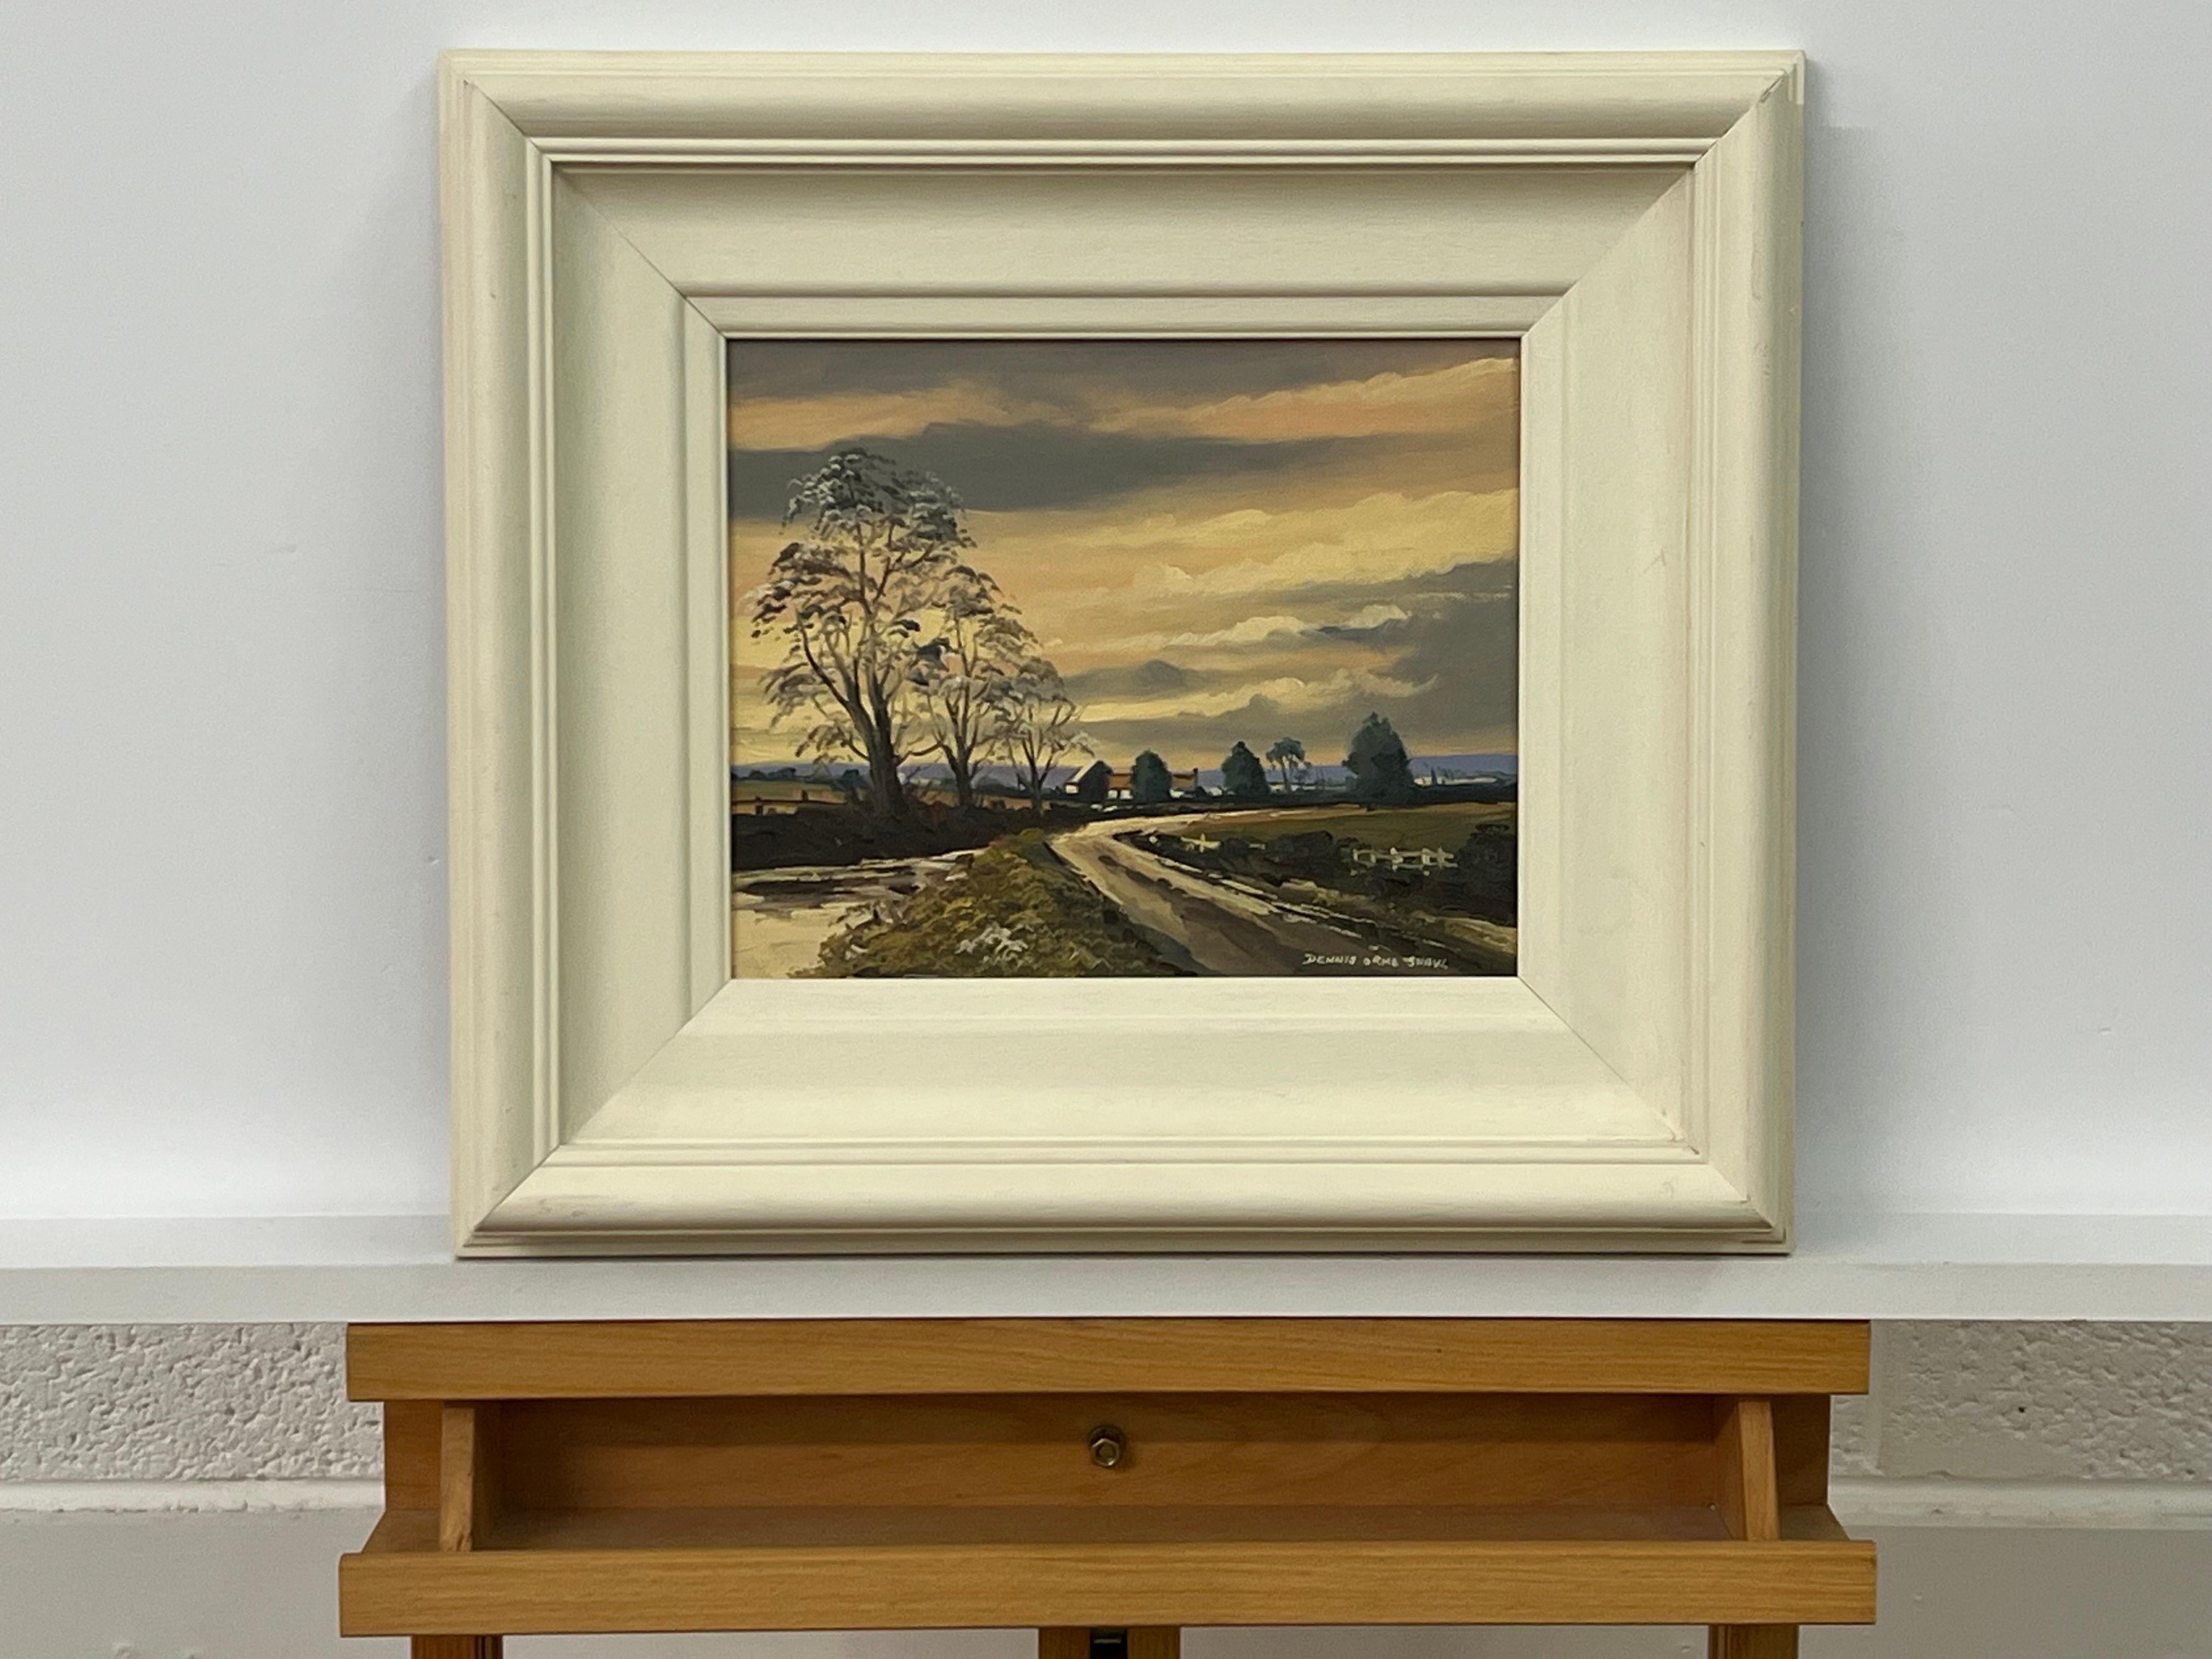 Sunset in Ireland Countryside - Original Oil Painting by Northern Irish Artist For Sale 8